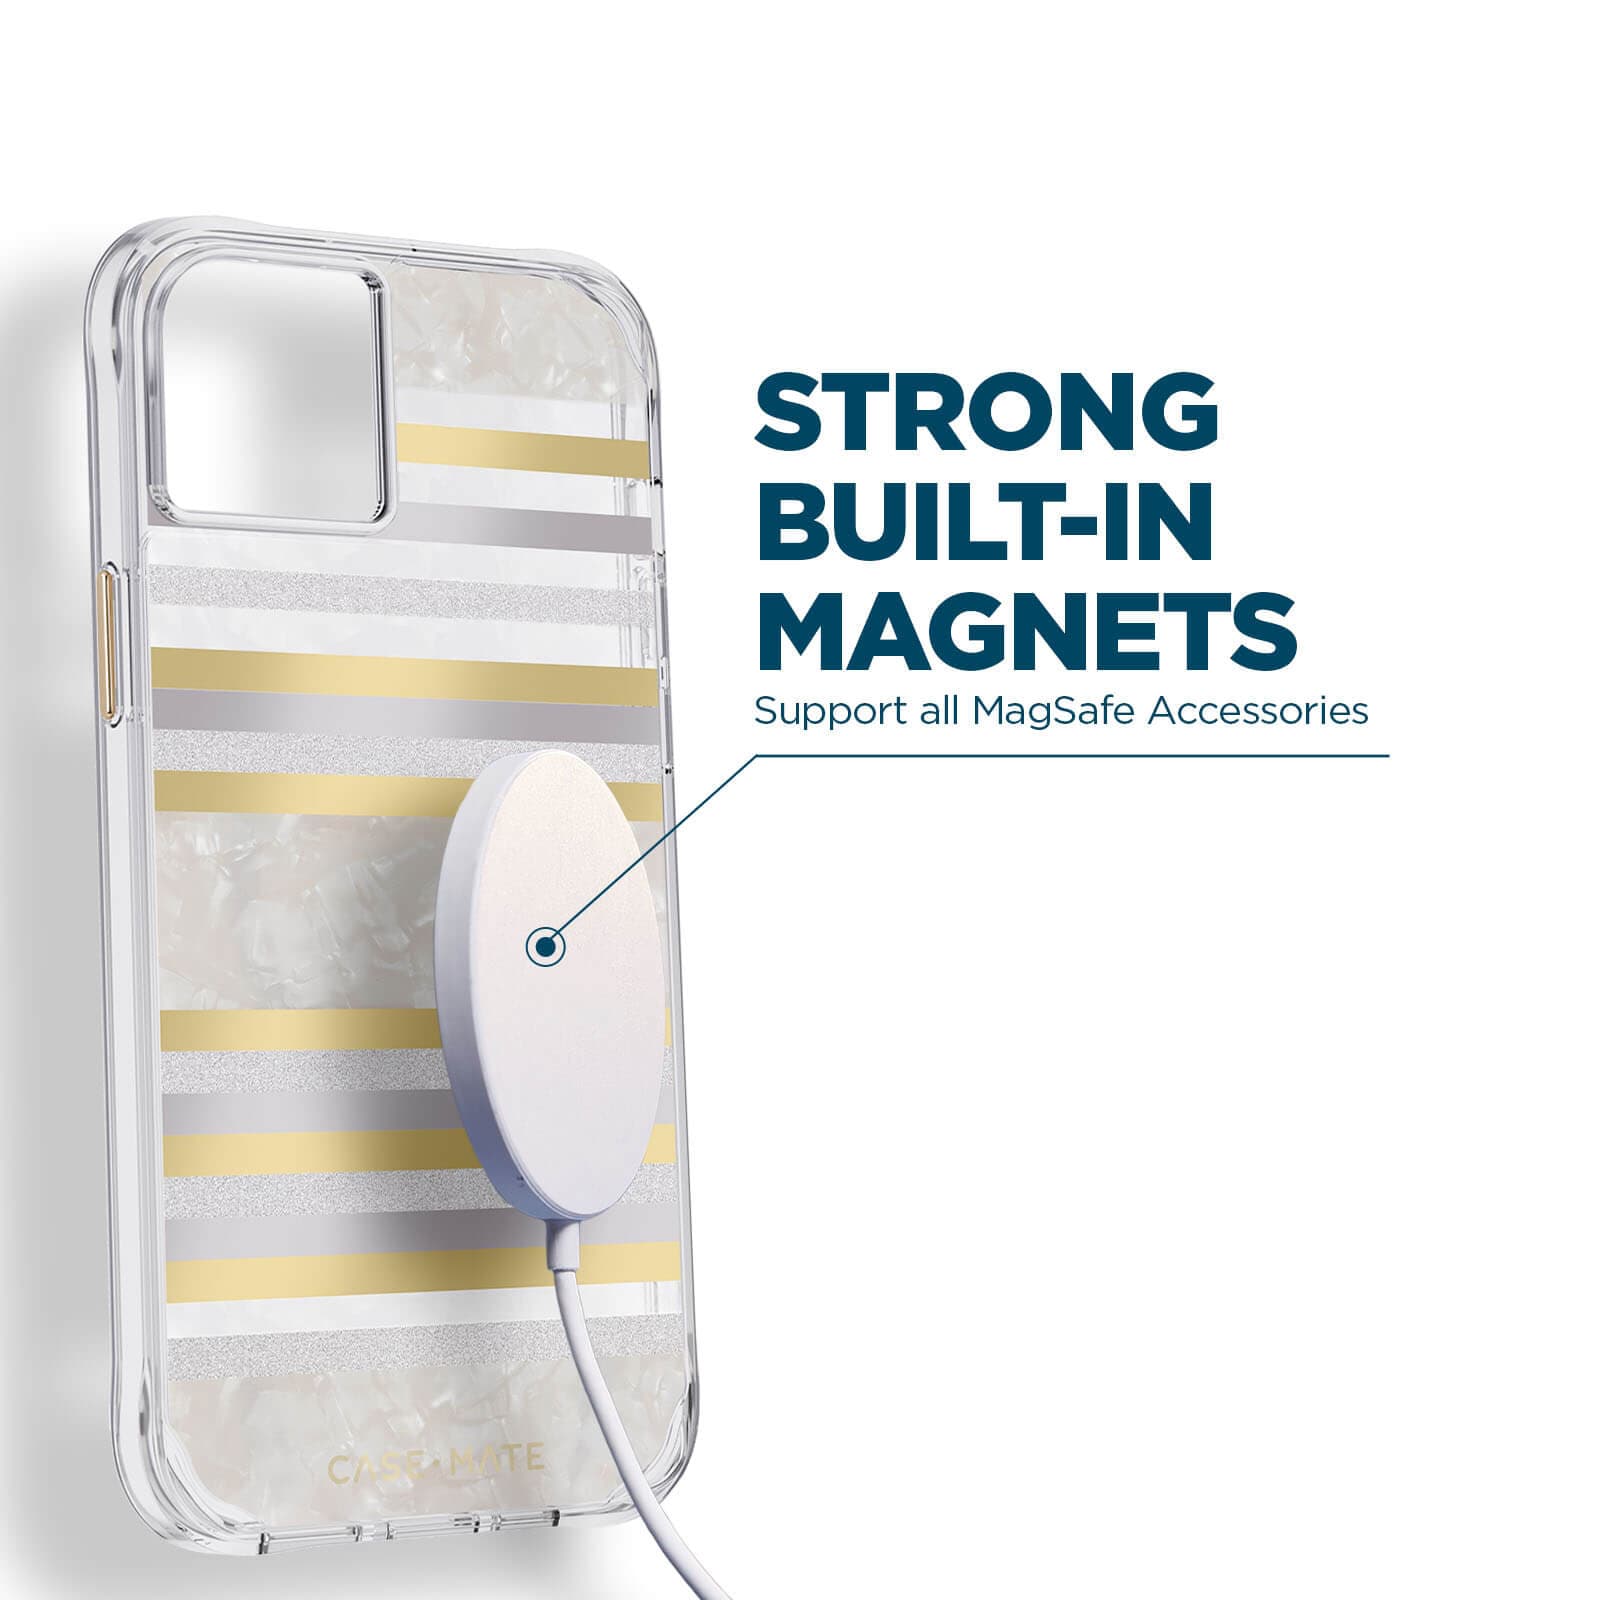 Strong built-in magnets support all MagSafe accessories. color::Pearl